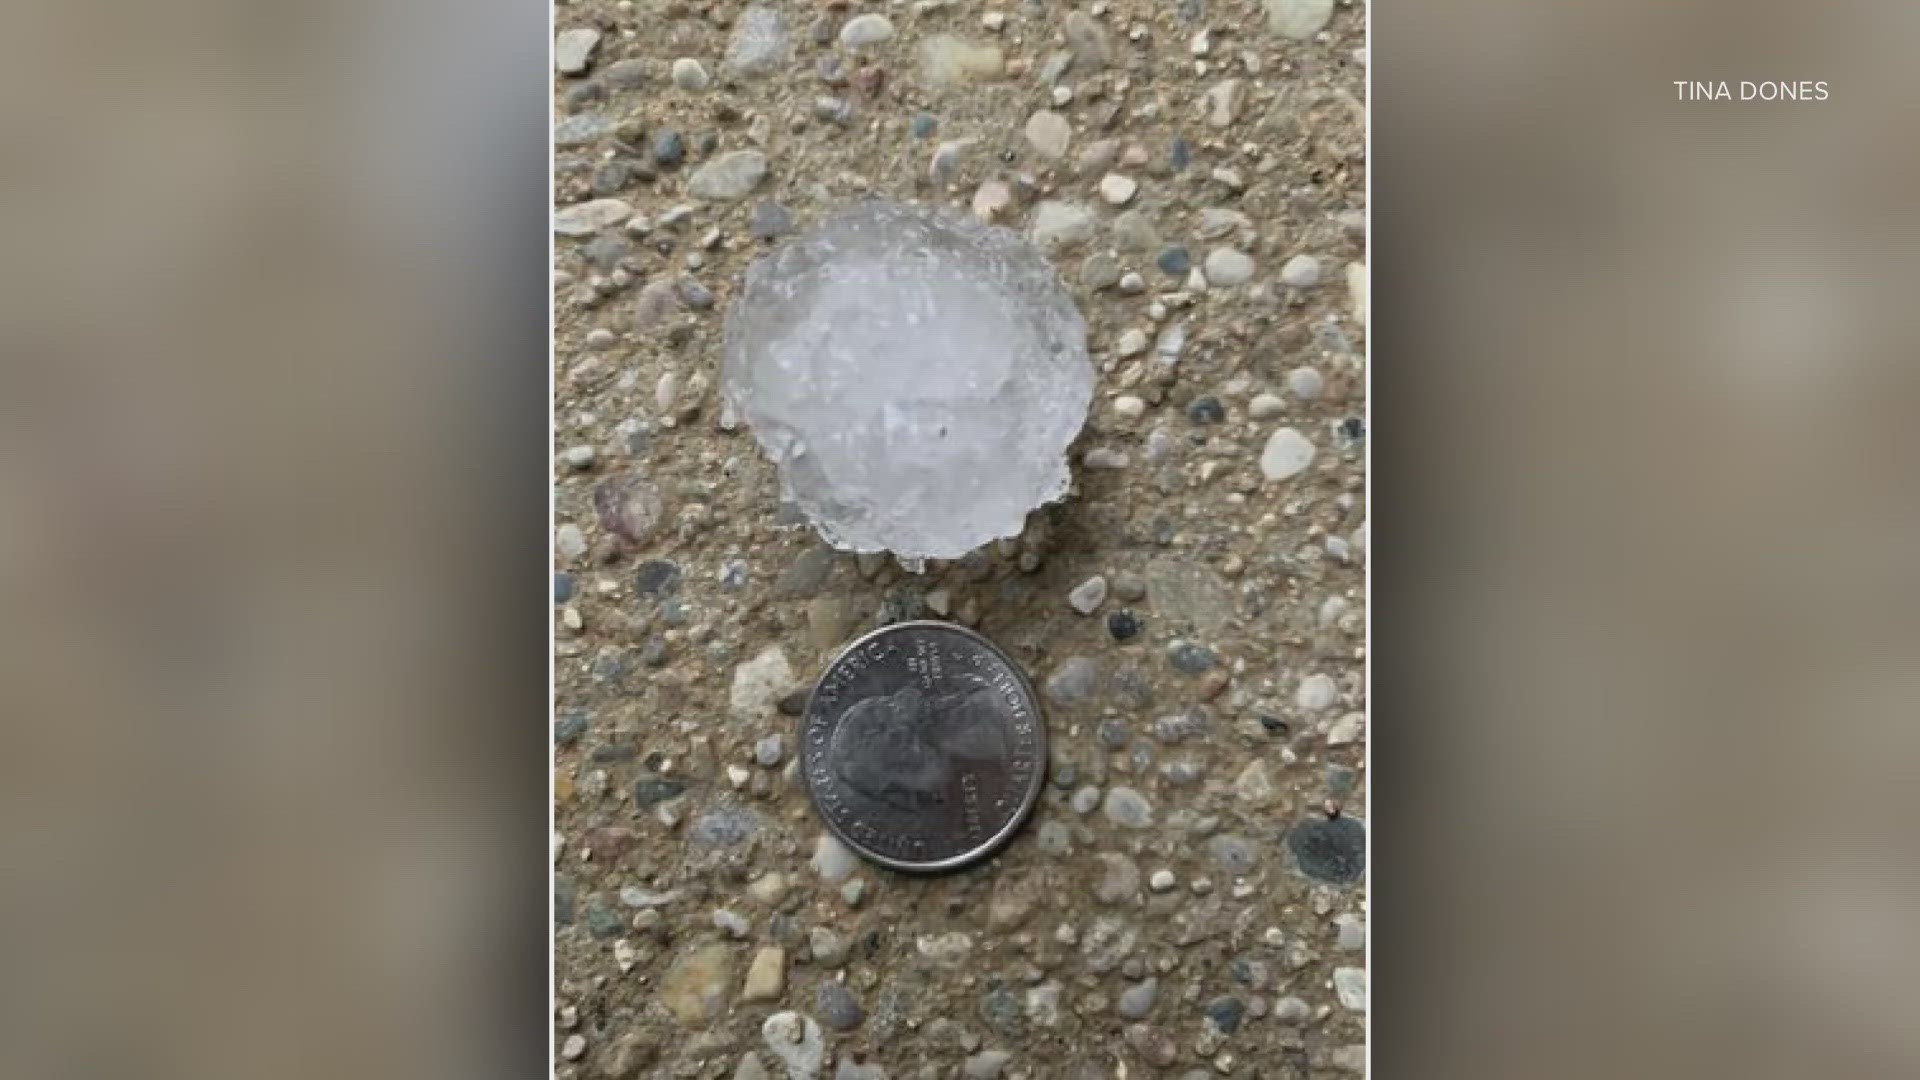 Here's how to submit your own storm photos to WHAS11.